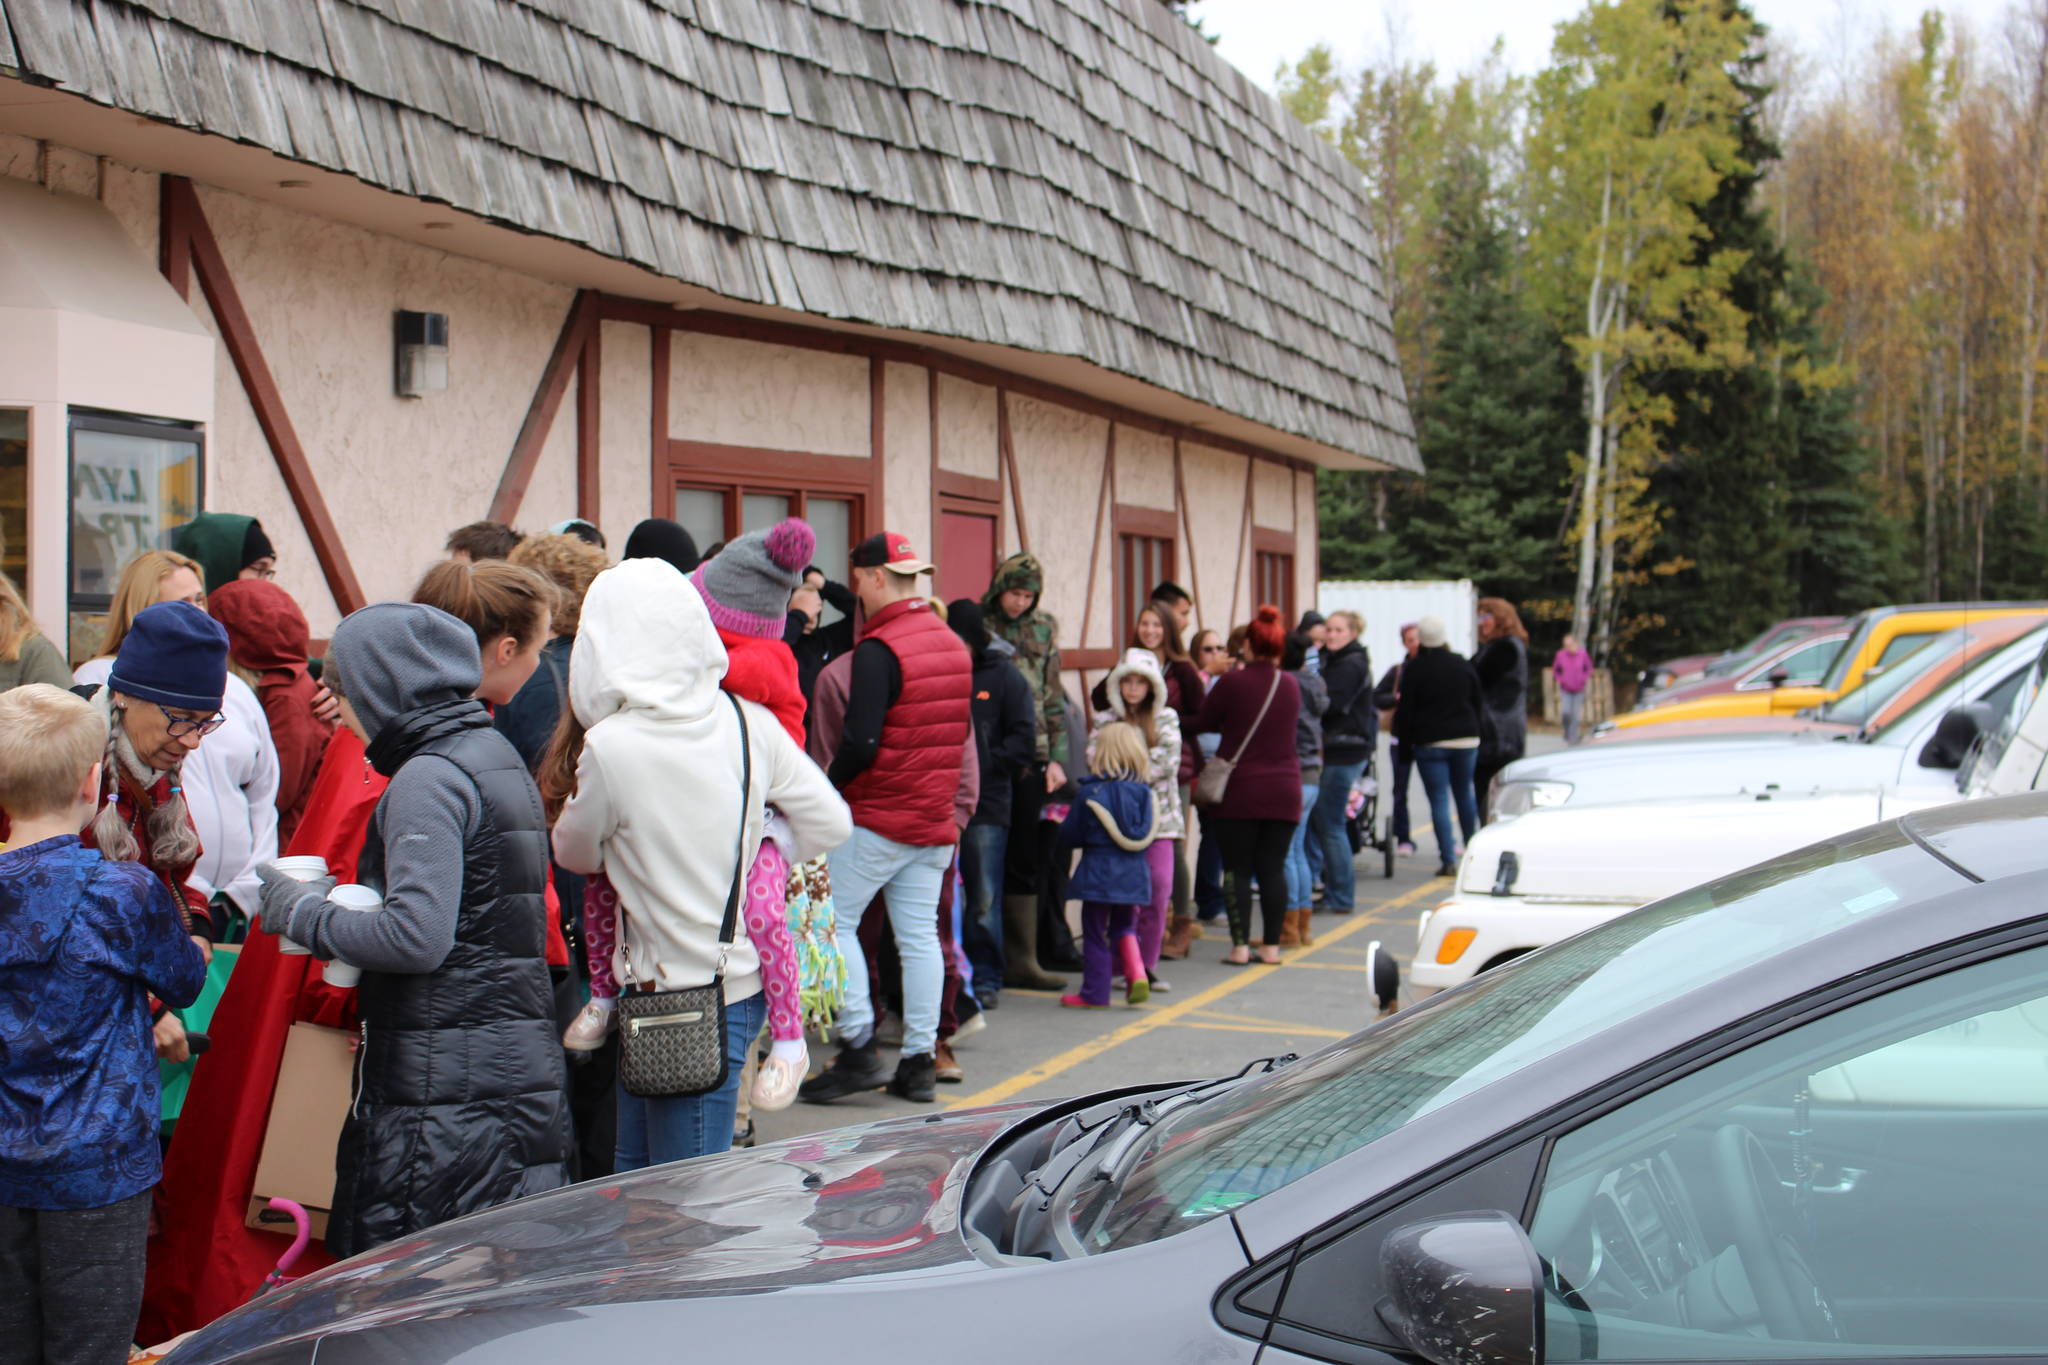 Brian Mazurek / Peninsula Clarion                                The line outside of the Moose Is Loose can be seen Saturday on the popular bakery’s last day of business.